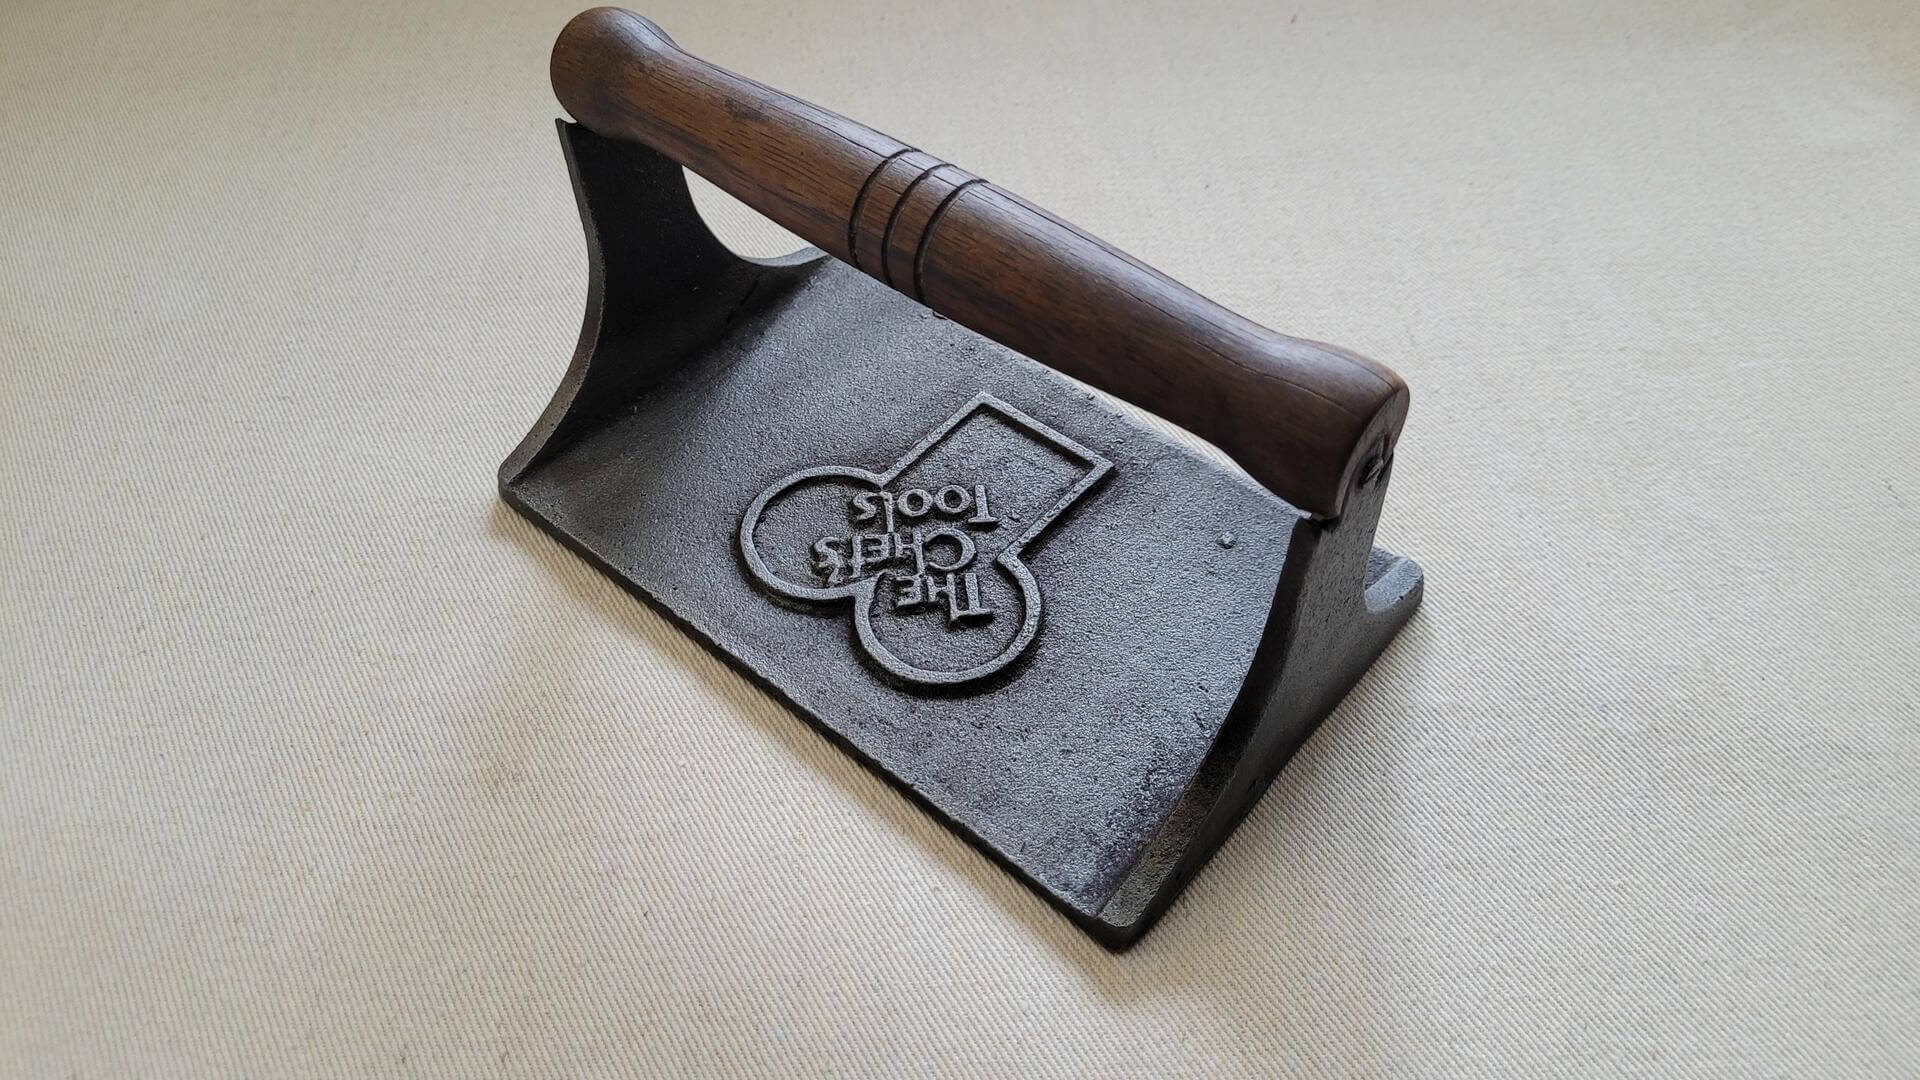 Vintage cast iron bacon press with wooden handle 4.5"x7" inches. Collectible rustic farmhouse kitchen tools featuring pig and vine design on the plate underside.